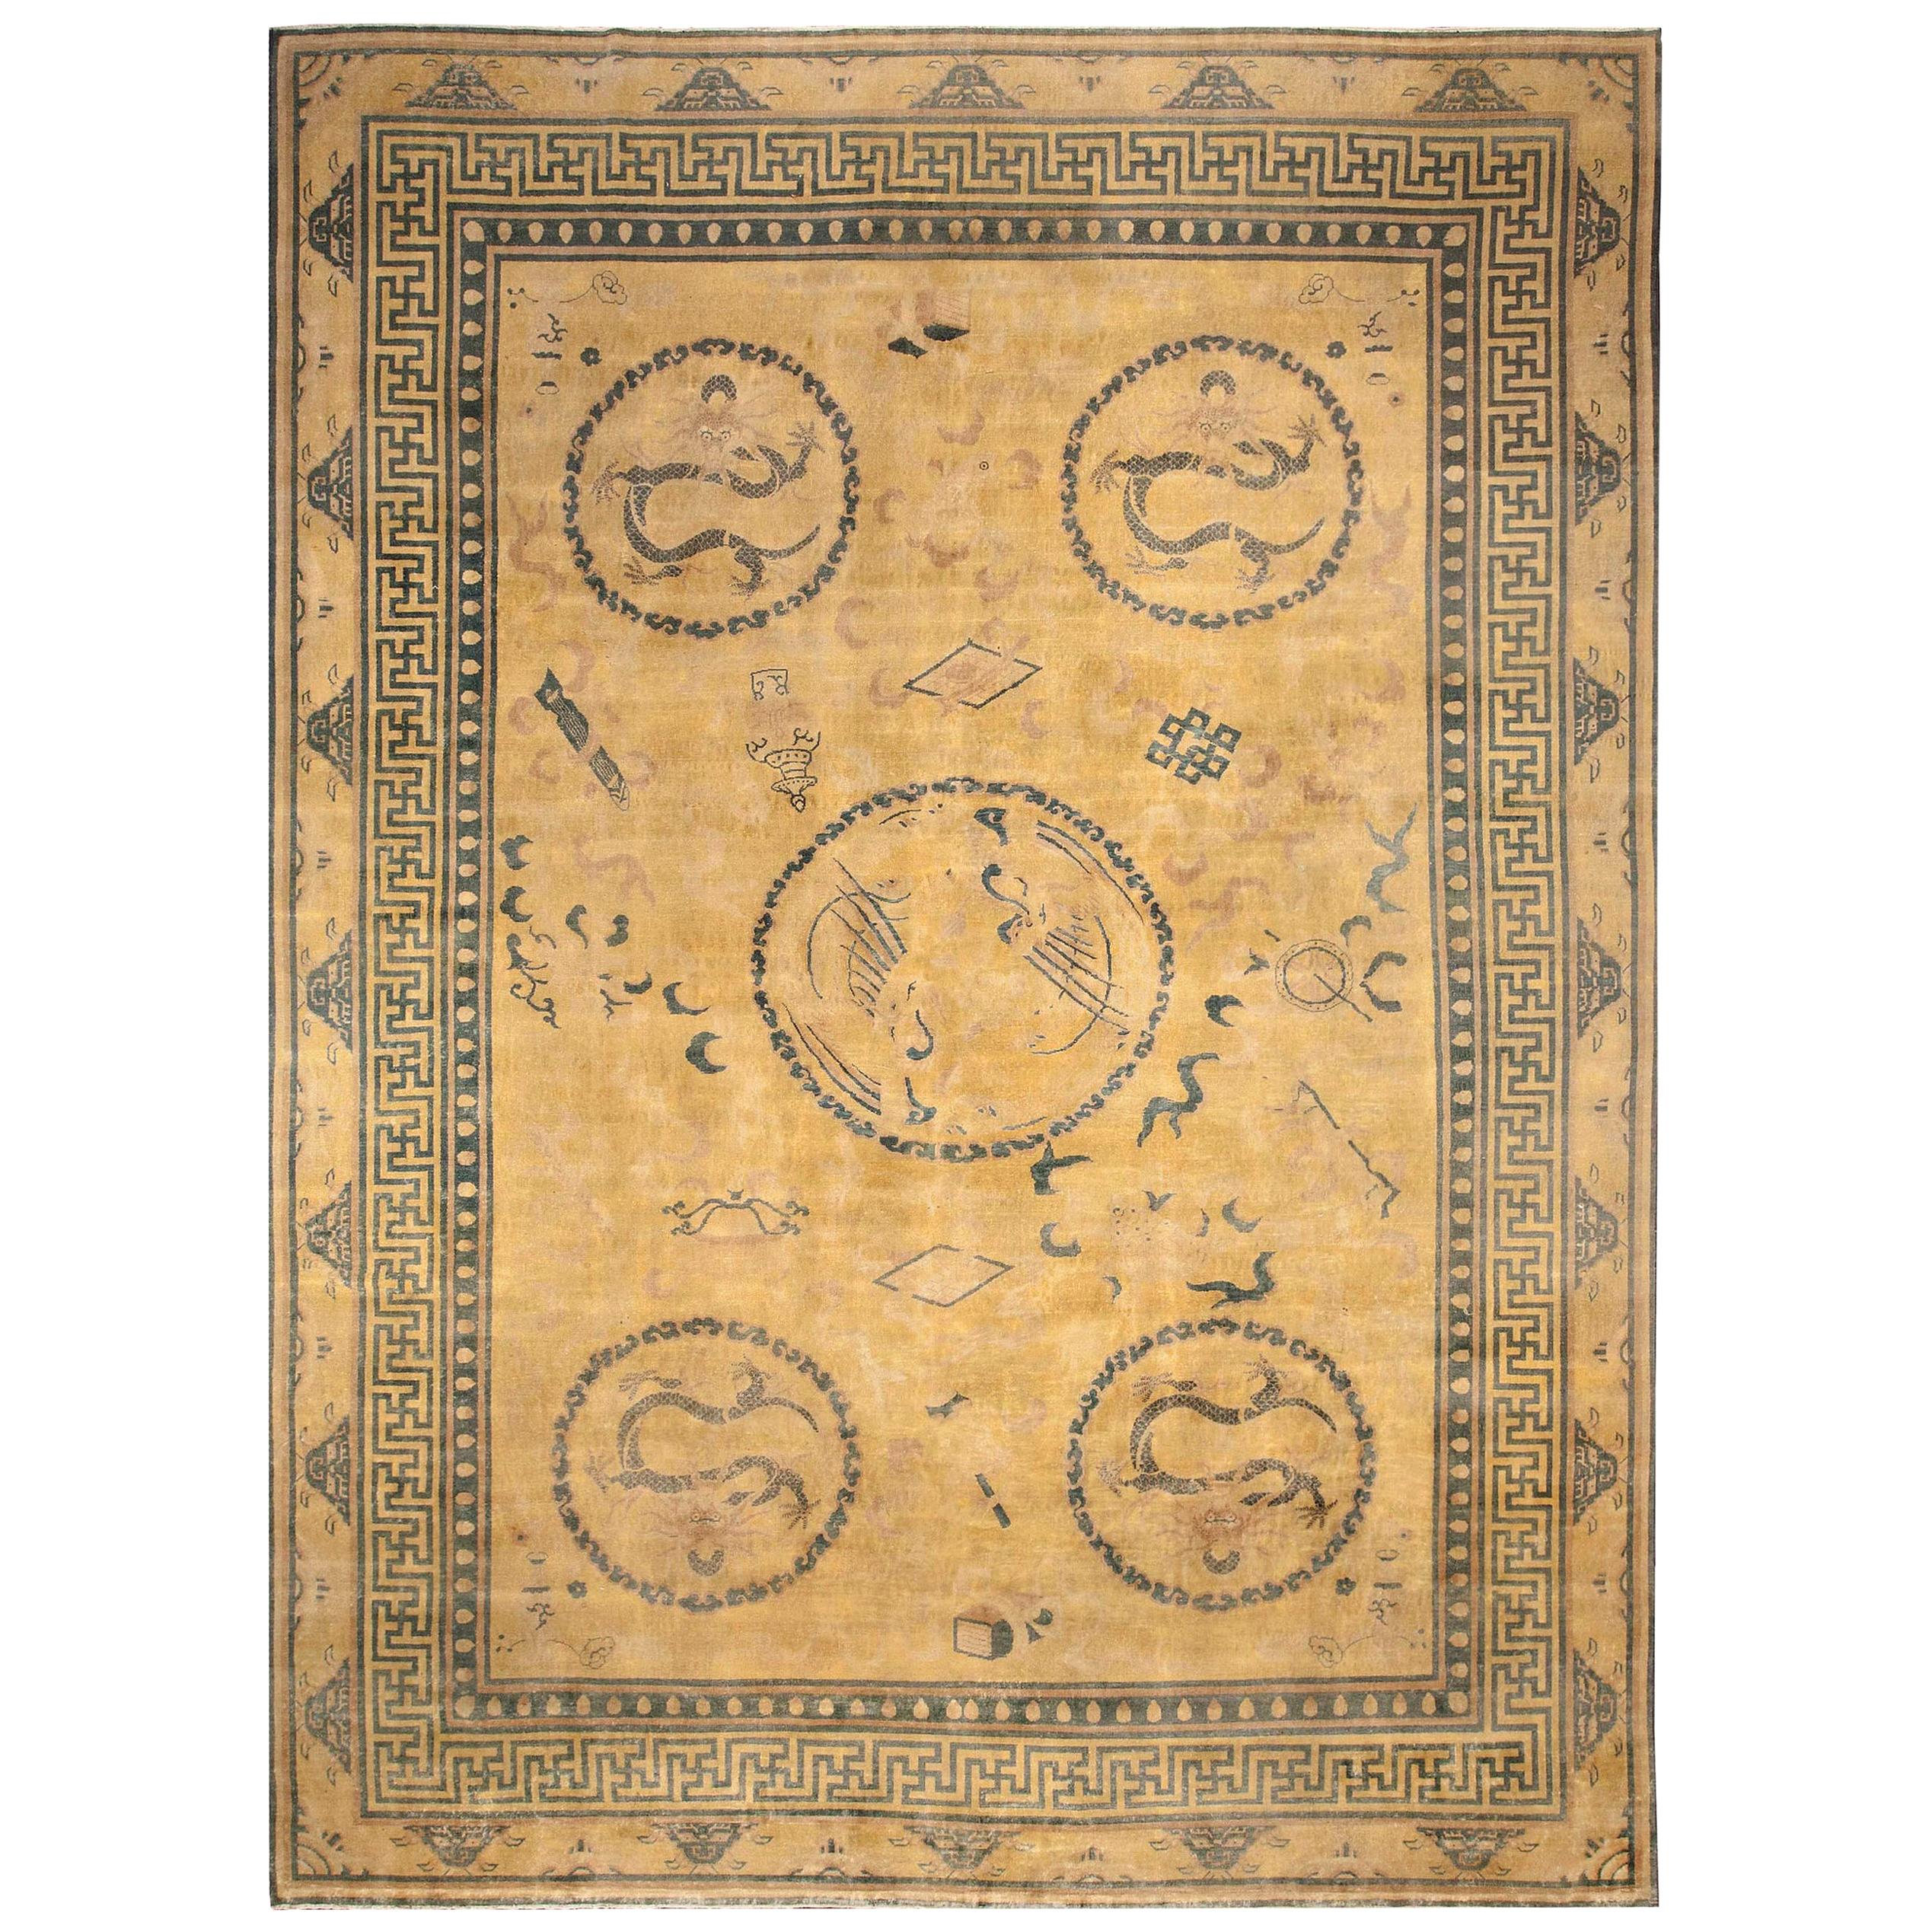 Early 20th Century Chinese Handwoven Wool Carpet